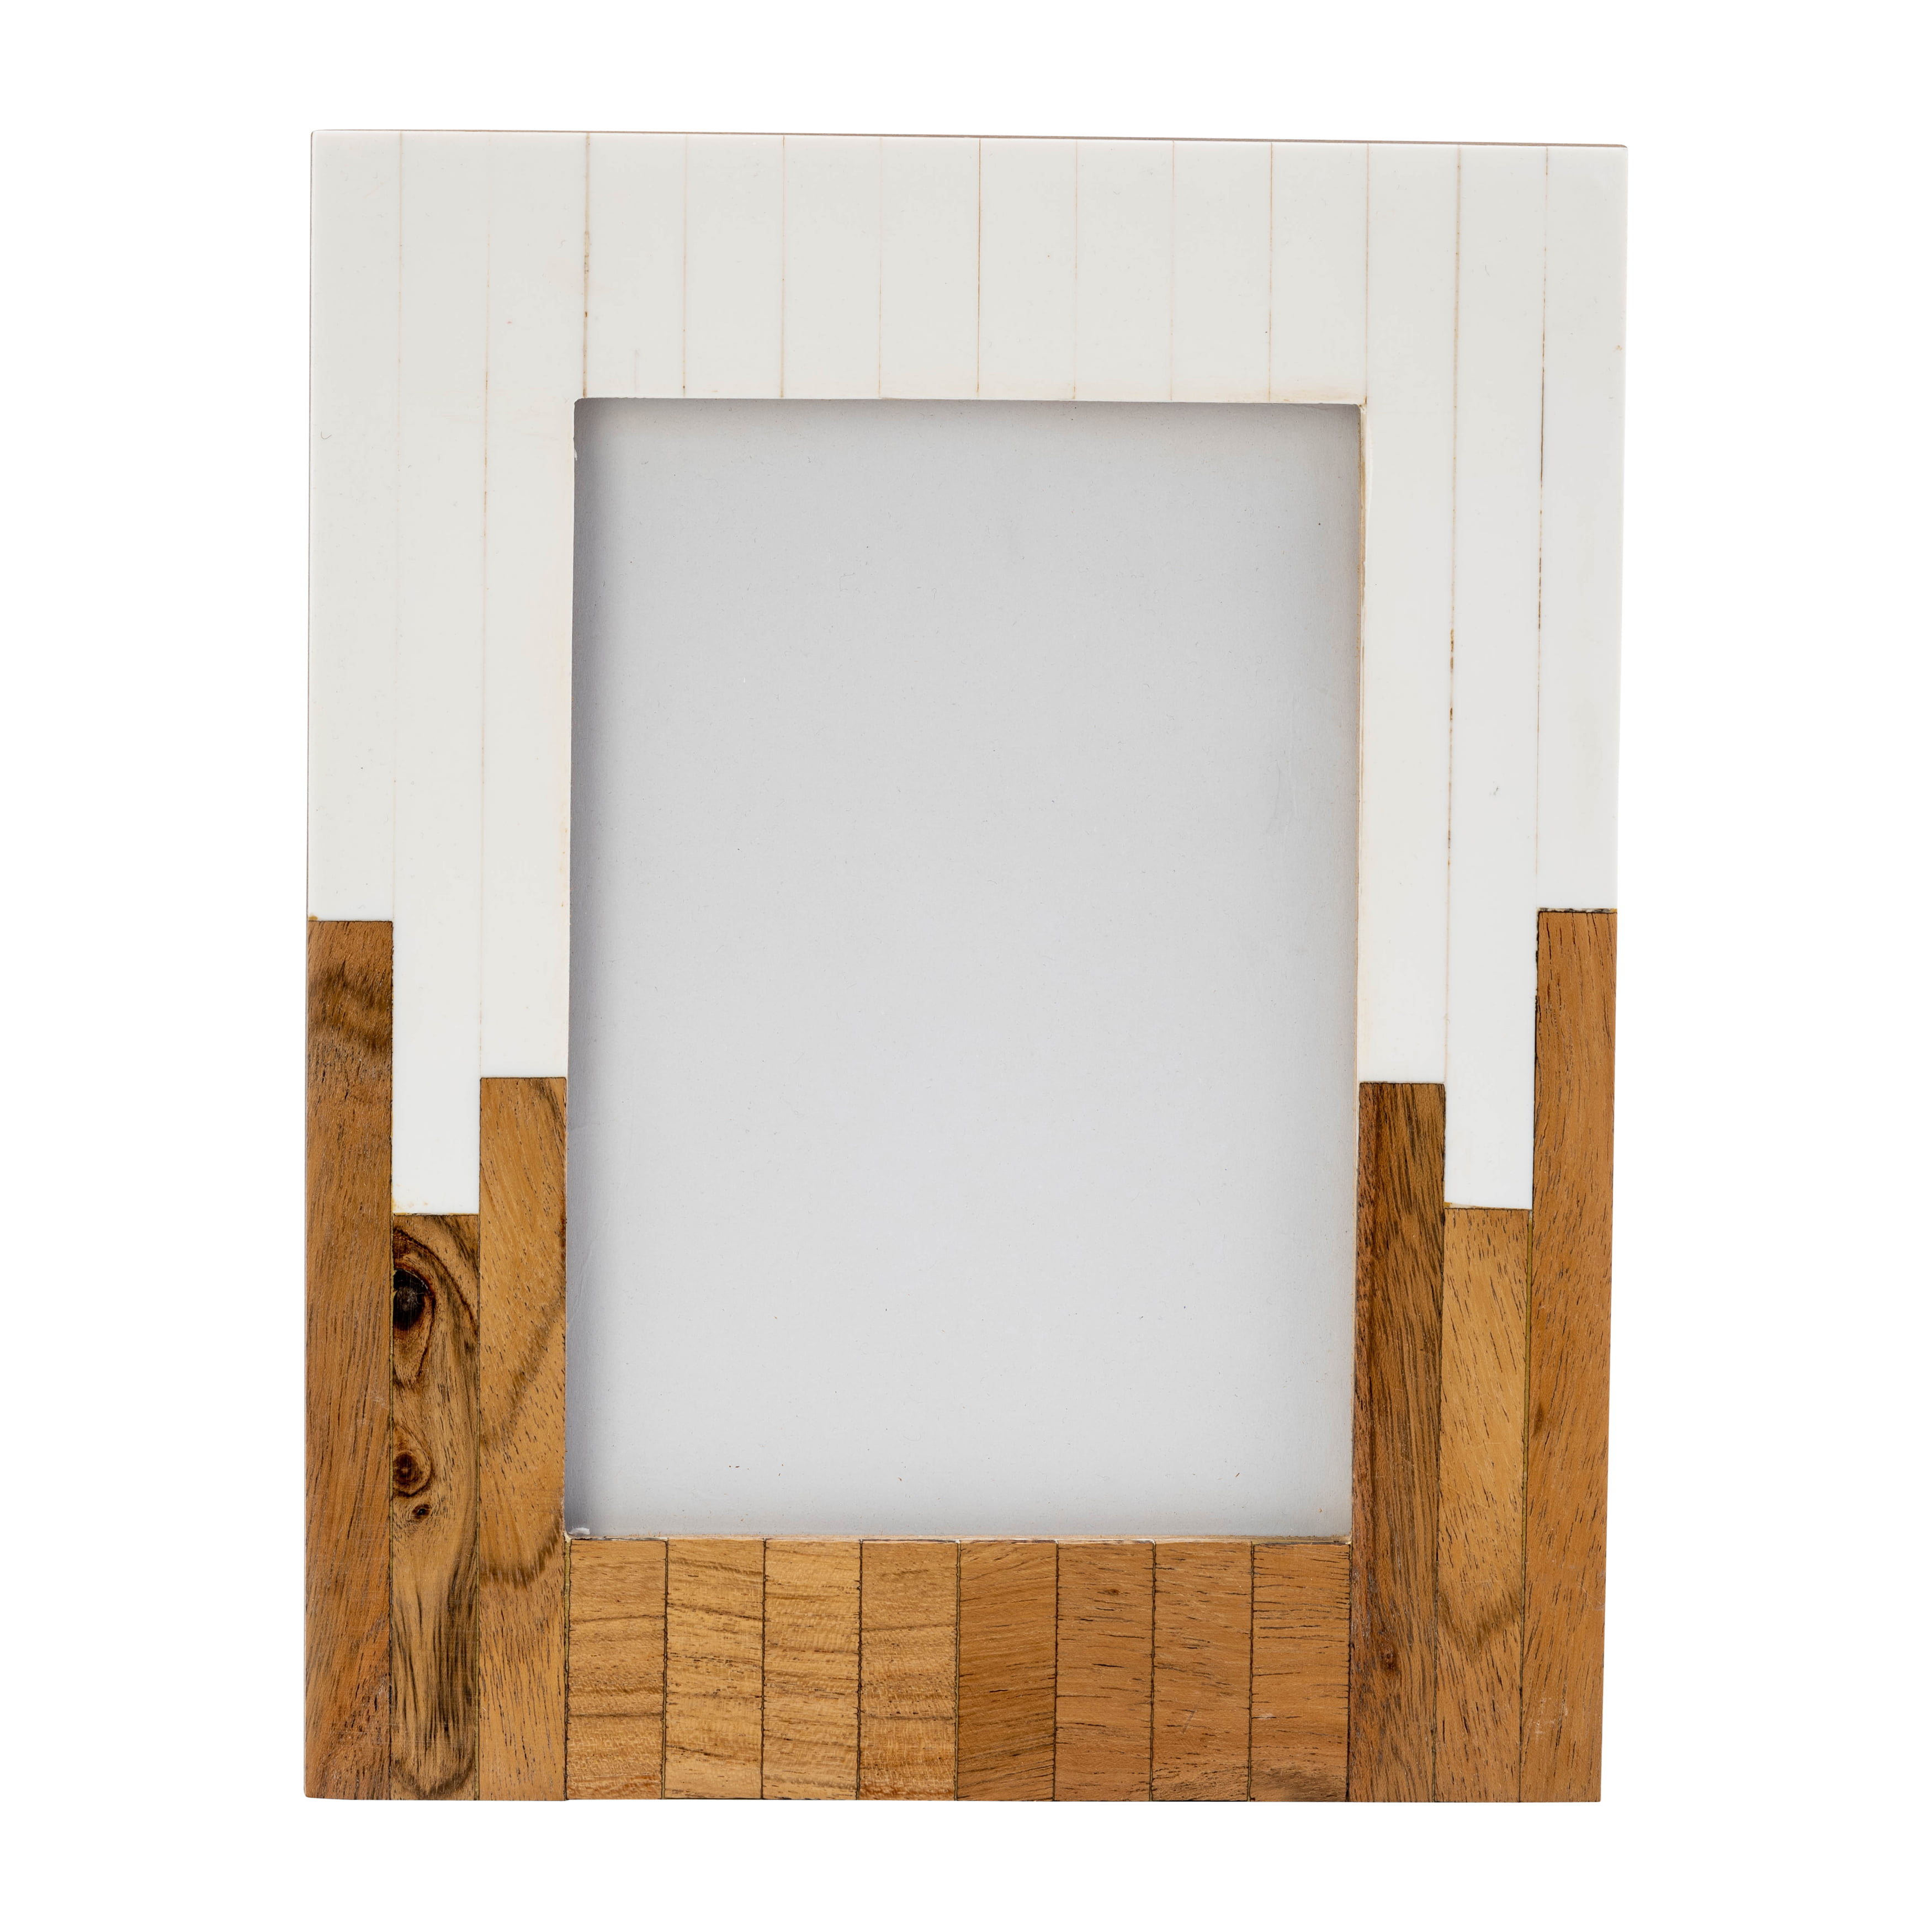 18x24 Natural Picture Frame with 15.5x19.5 White Mat Opening for 16x20  Image, 0.75 Inch Border, UV 